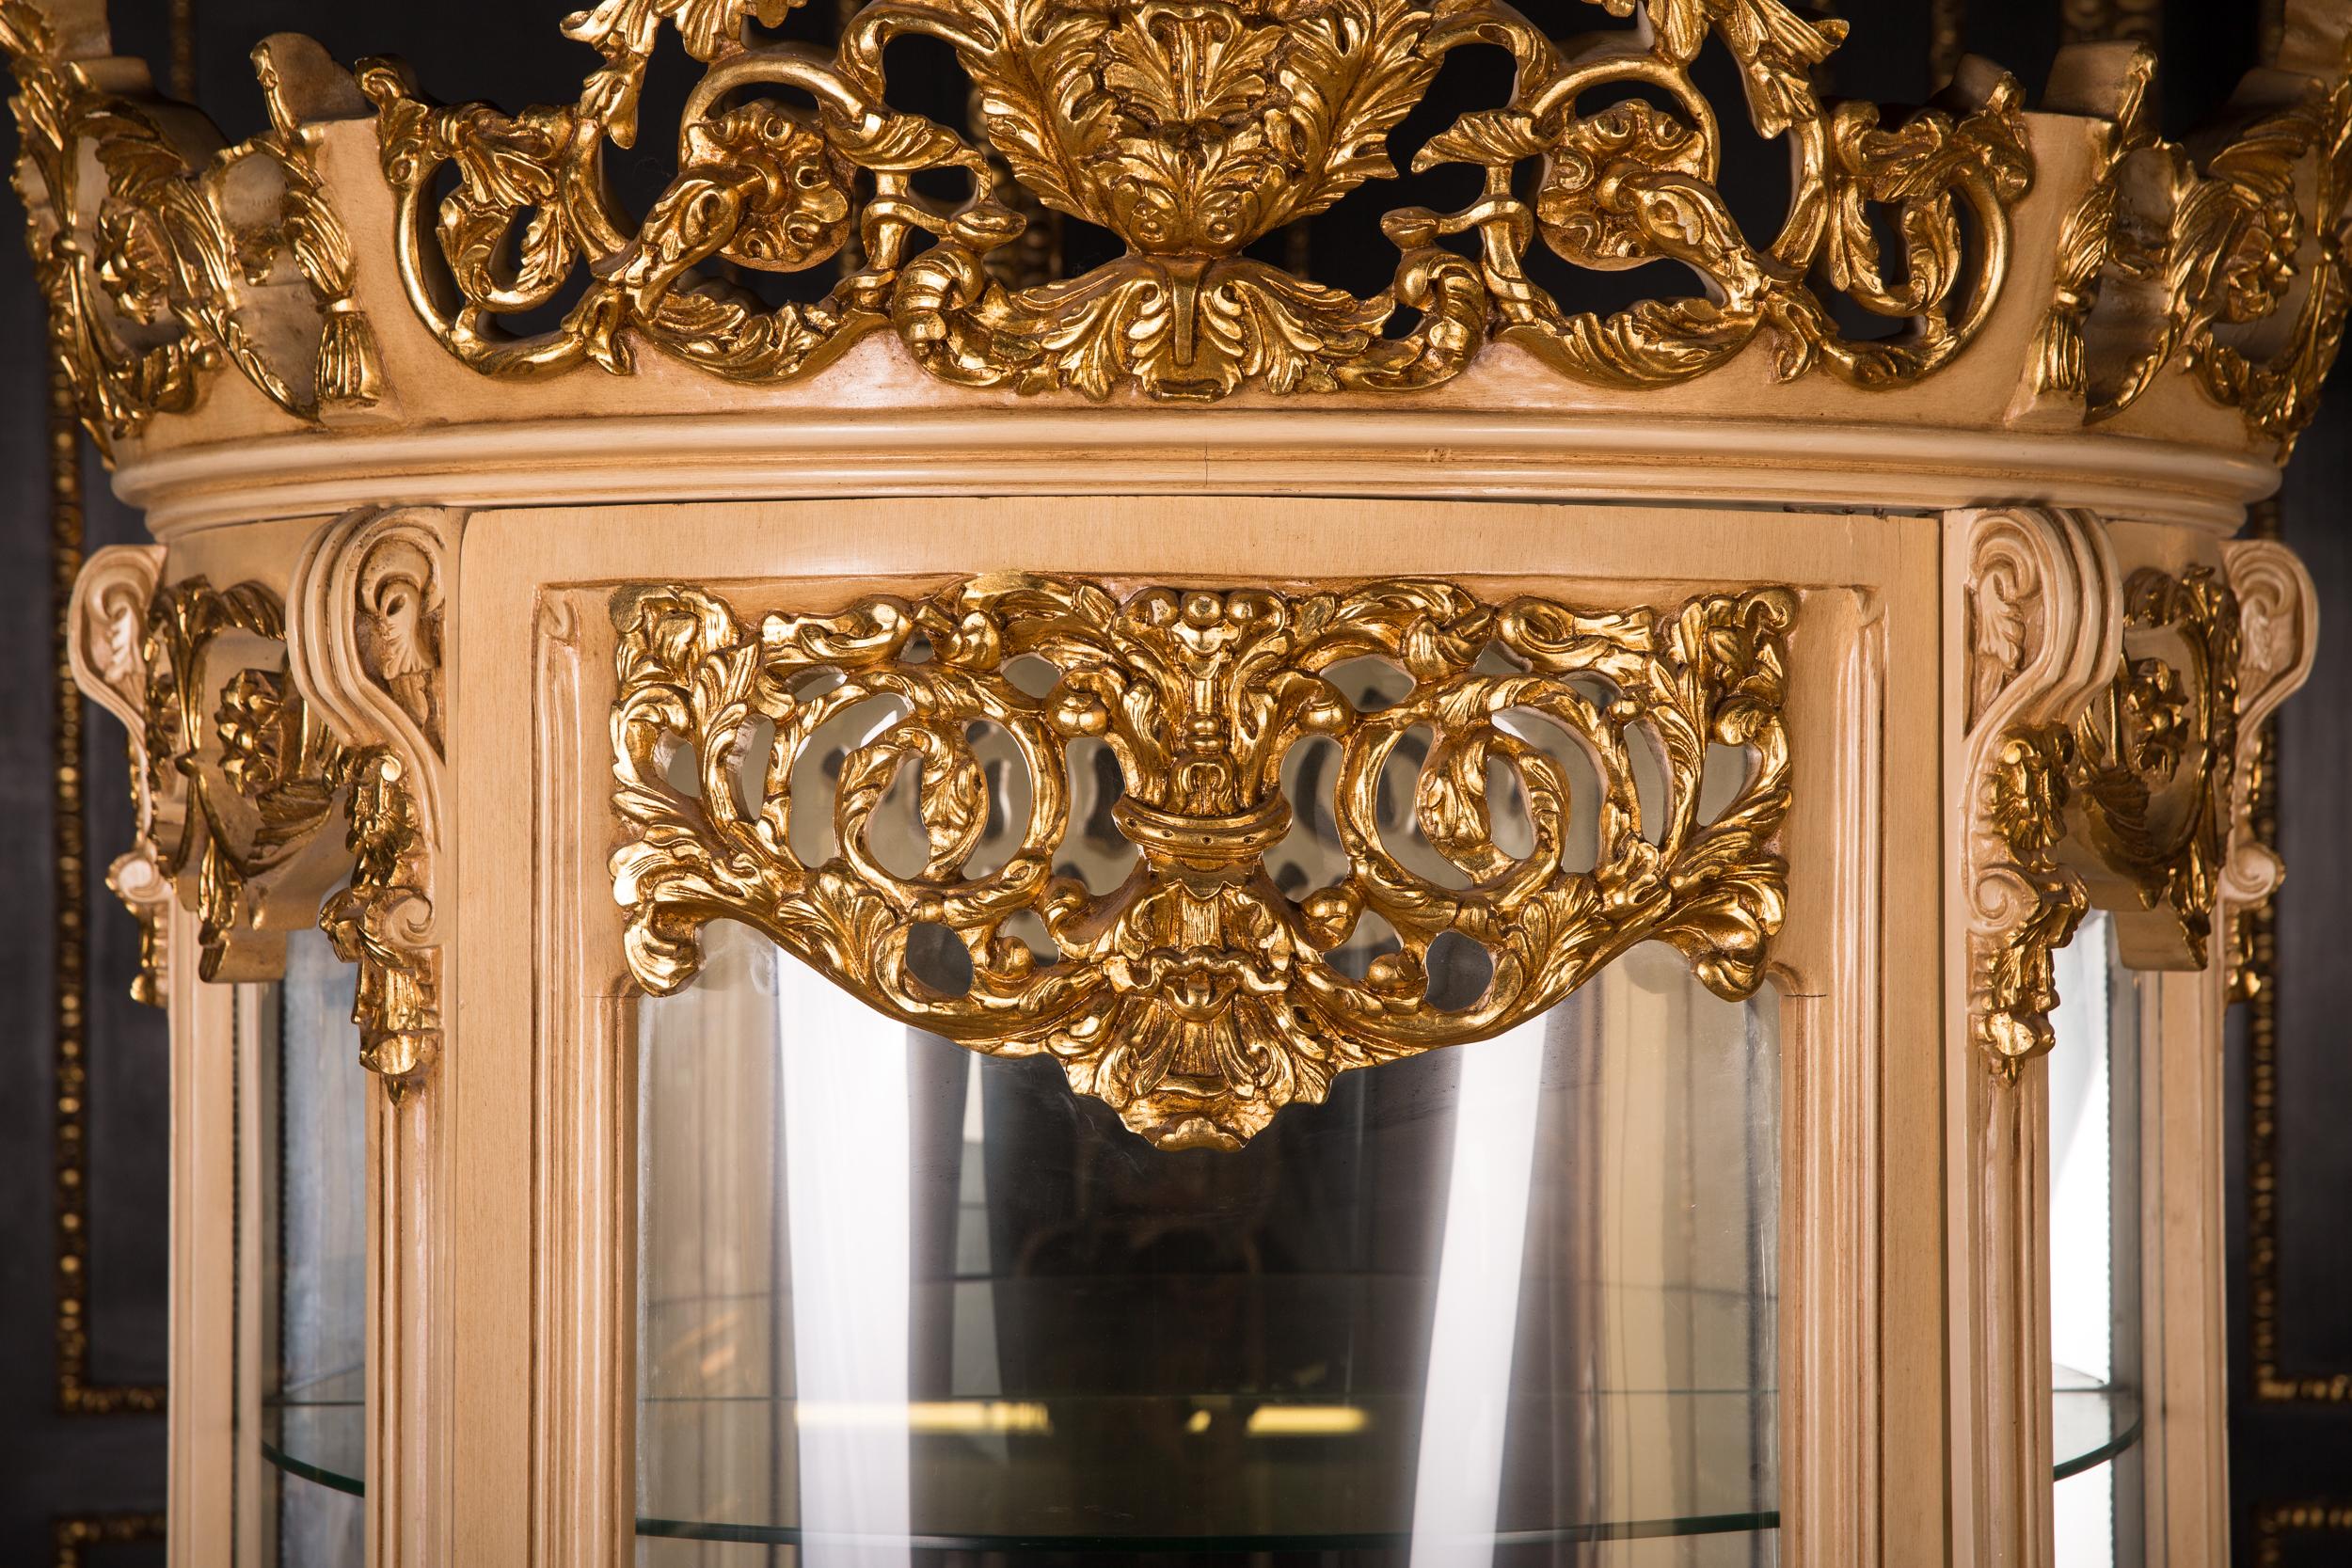 20th Century Monumental French Vitrine in the Style of the 18th Century